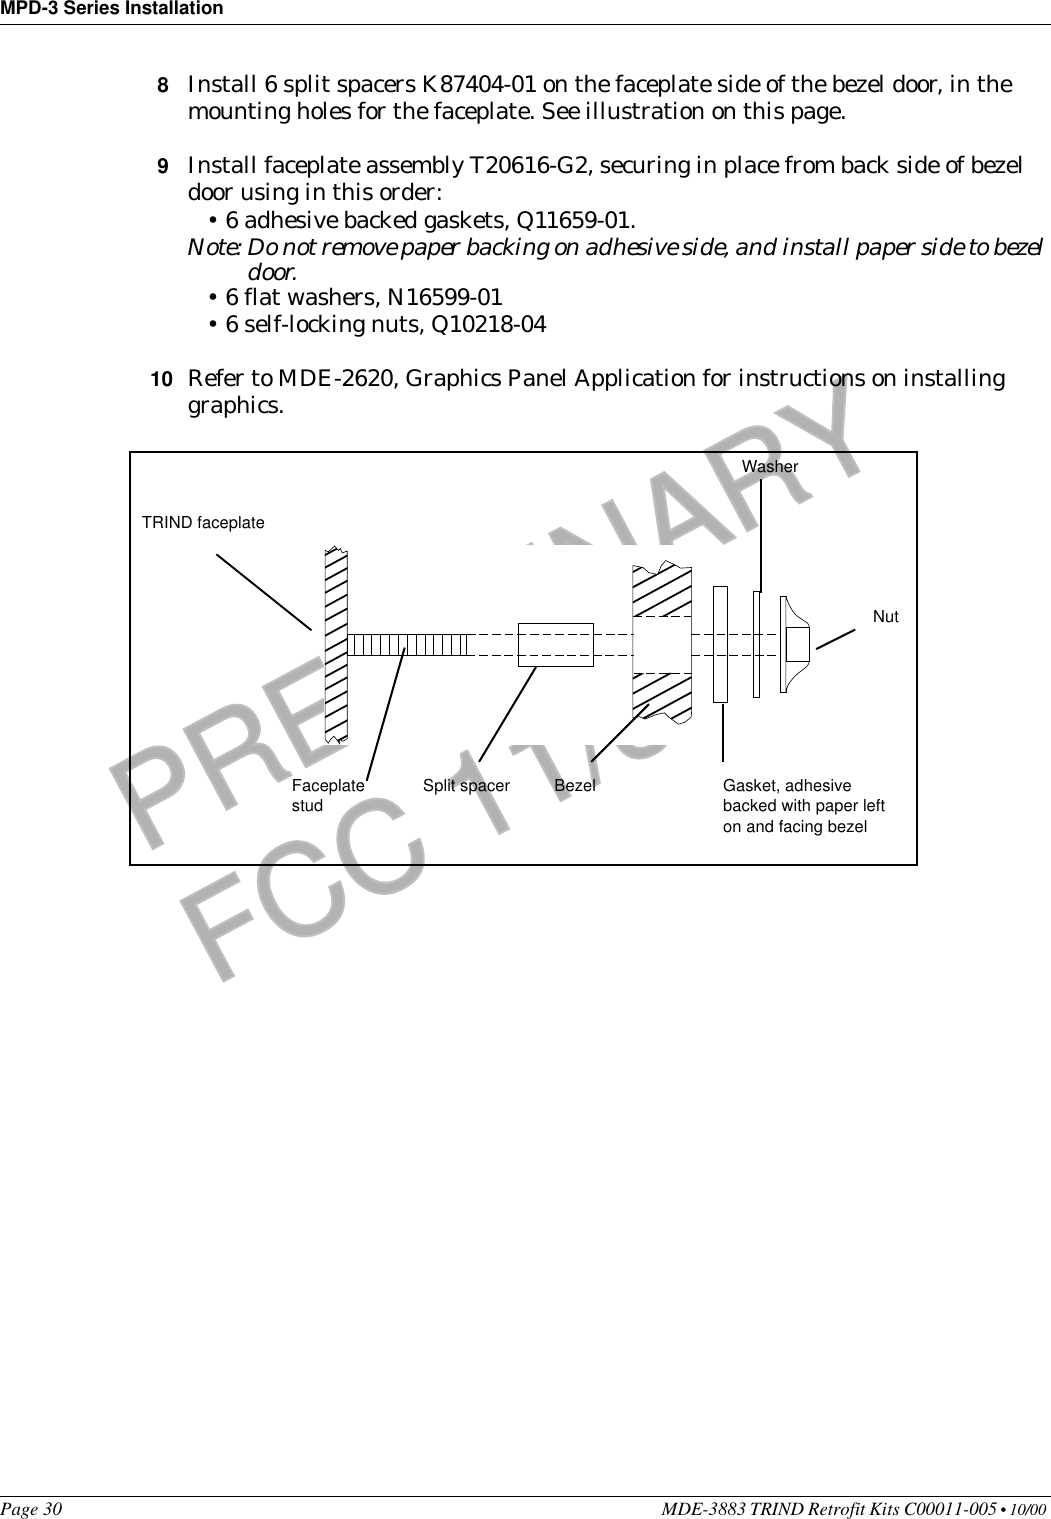 MPD-3 Series InstallationPage 30 MDE-3883 TRIND Retrofit Kits C00011-005 • 10/00 PRELIMINARYFCC 11/308Install 6 split spacers K87404-01 on the faceplate side of the bezel door, in the mounting holes for the faceplate. See illustration on this page.9Install faceplate assembly T20616-G2, securing in place from back side of bezel door using in this order:•6 adhesive backed gaskets, Q11659-01.Note: Do not remove paper backing on adhesive side, and install paper side to bezel door.•6 flat washers, N16599-01•6 self-locking nuts, Q10218-0410 Refer to MDE-2620, Graphics Panel Application for instructions on installing graphics. TRIND faceplateBezelFaceplate studSplit spacer Gasket, adhesive backed with paper left on and facing bezelWasherNut